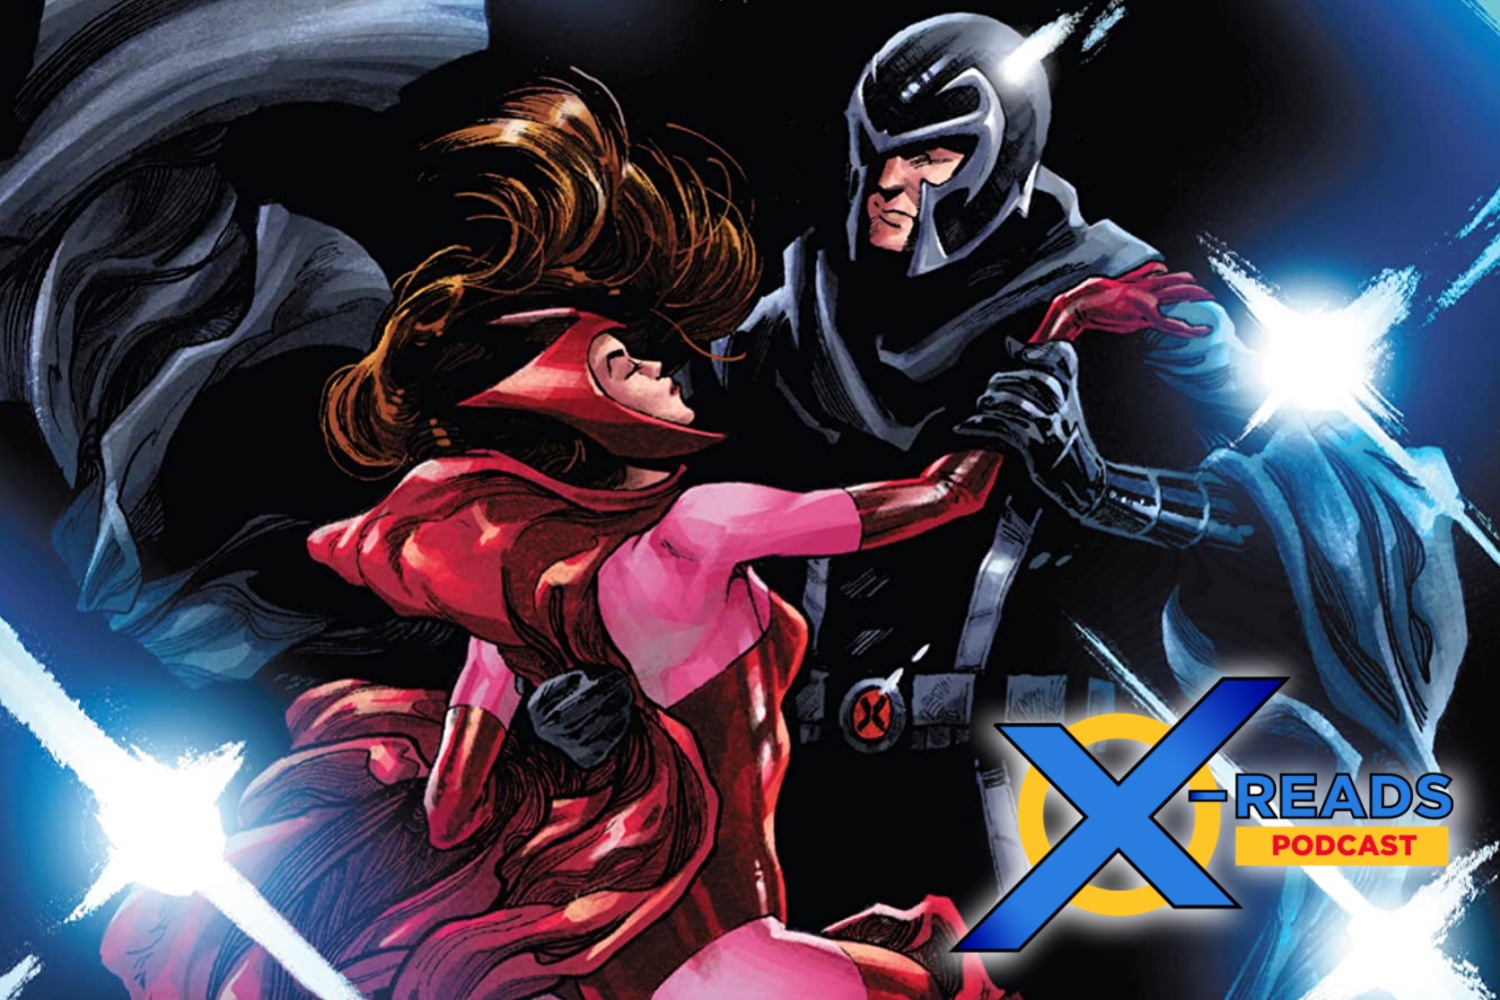 X-Reads Bonus Podcast Episode: 'The Trial of Magneto' #5 with Leah Williams